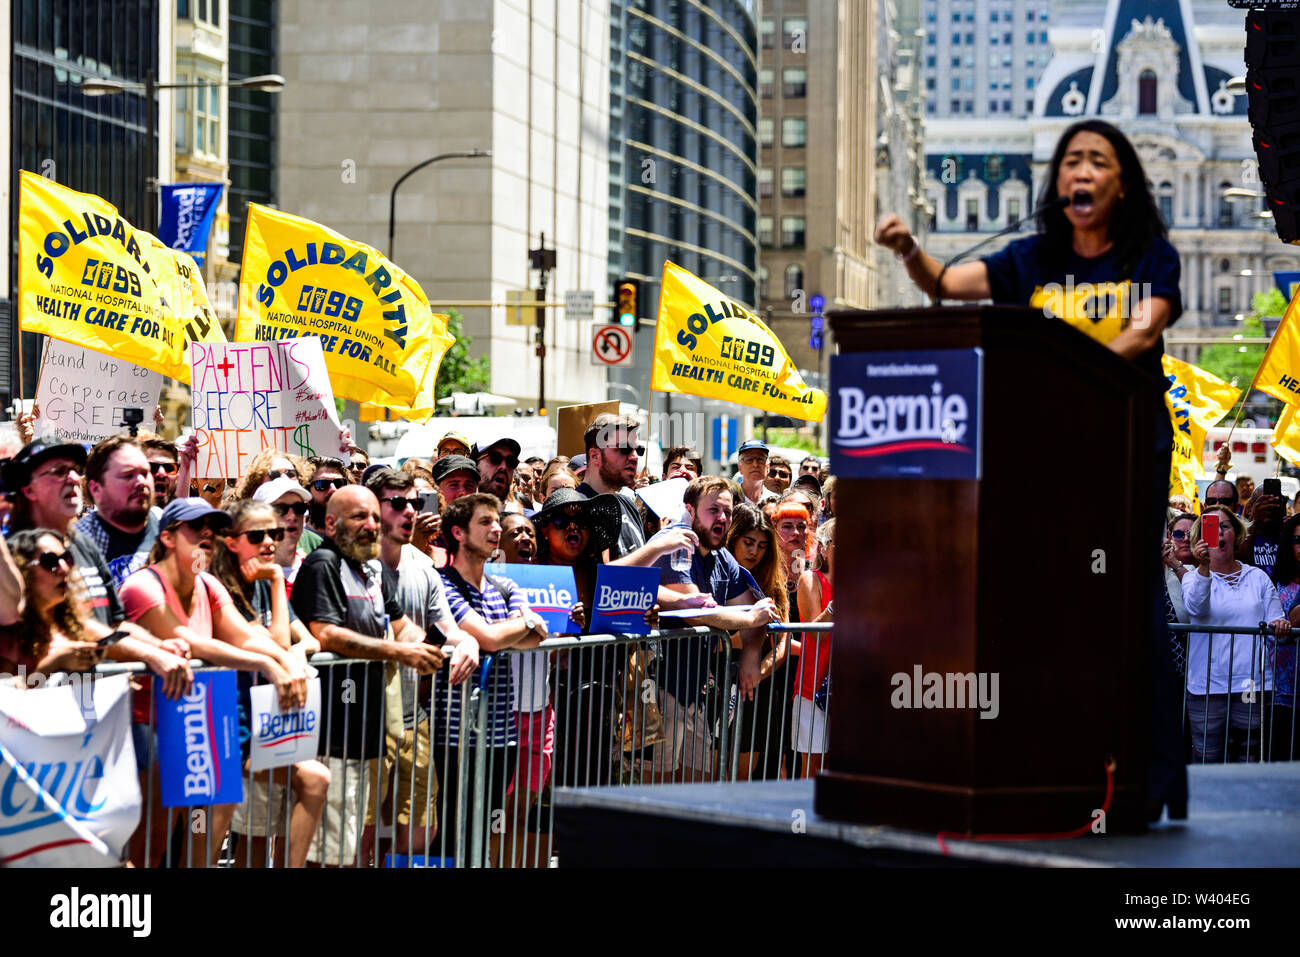 Philadelphia, Pennsylvania / USA. Philadelphia Councilwoman At-Large, Helen Gym, addresses hundreds from a podium in front of Hahnemann University Hospital in defence of health care workers. July 15, 2019. Photo Credit: Chris Baker Evens. Stock Photo